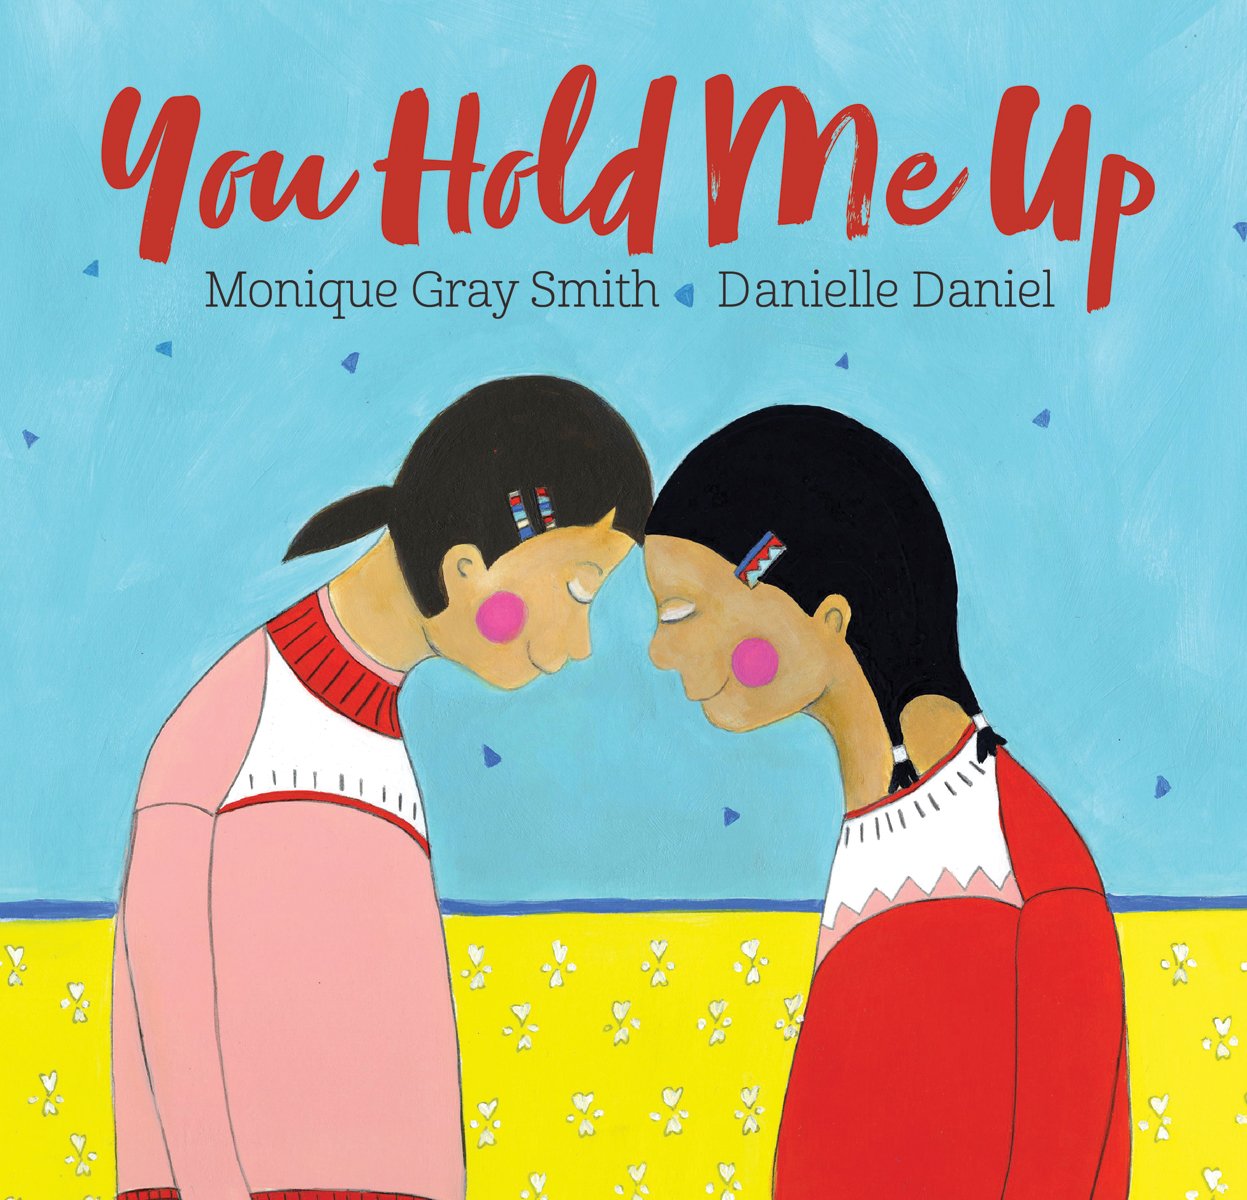 You Hold Me Up by Monique Gray Smith